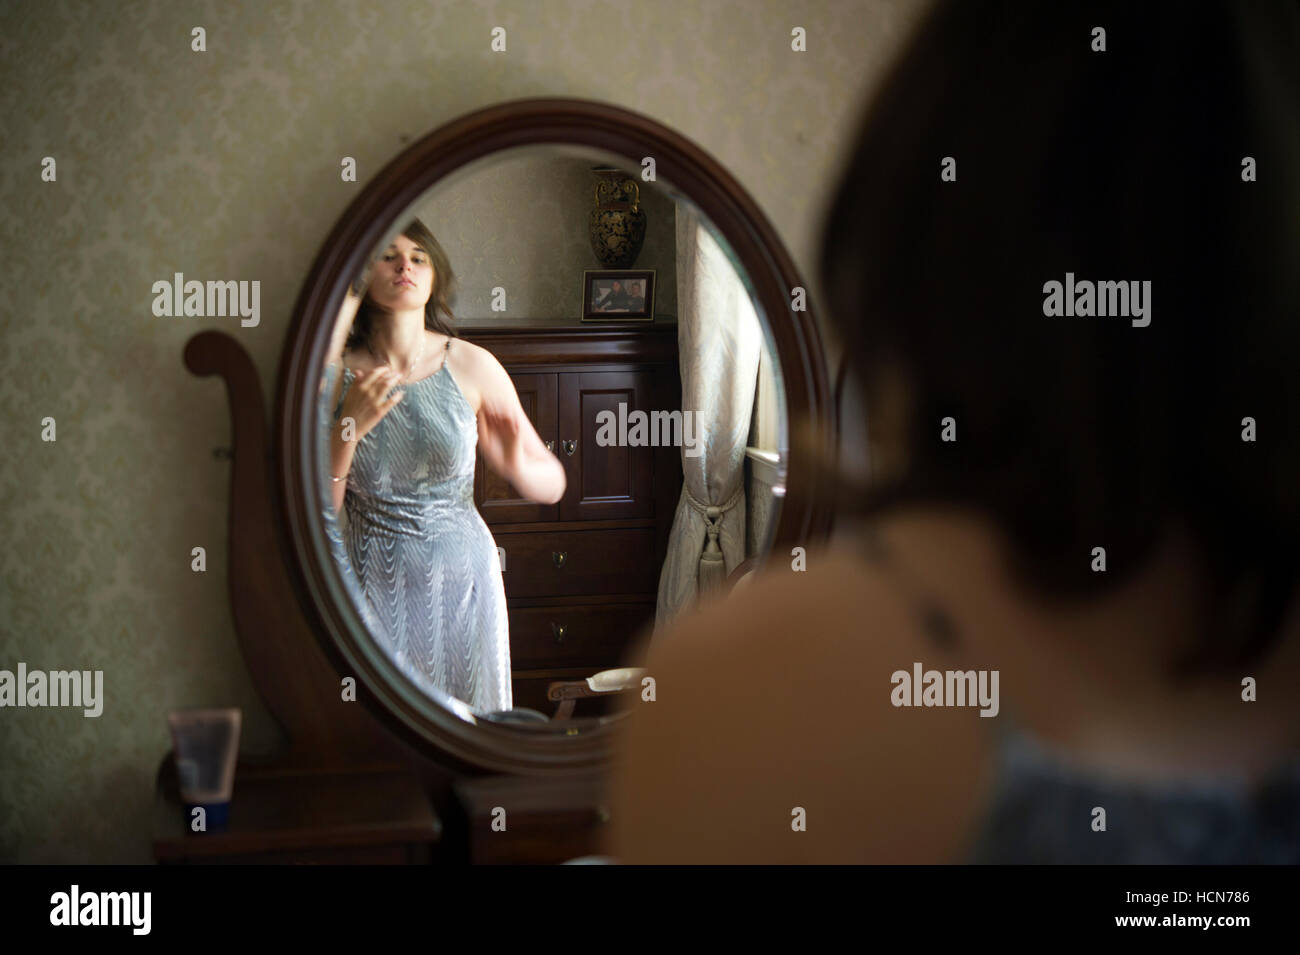 Young woman dressing in front of a vanity mirror Stock Photo